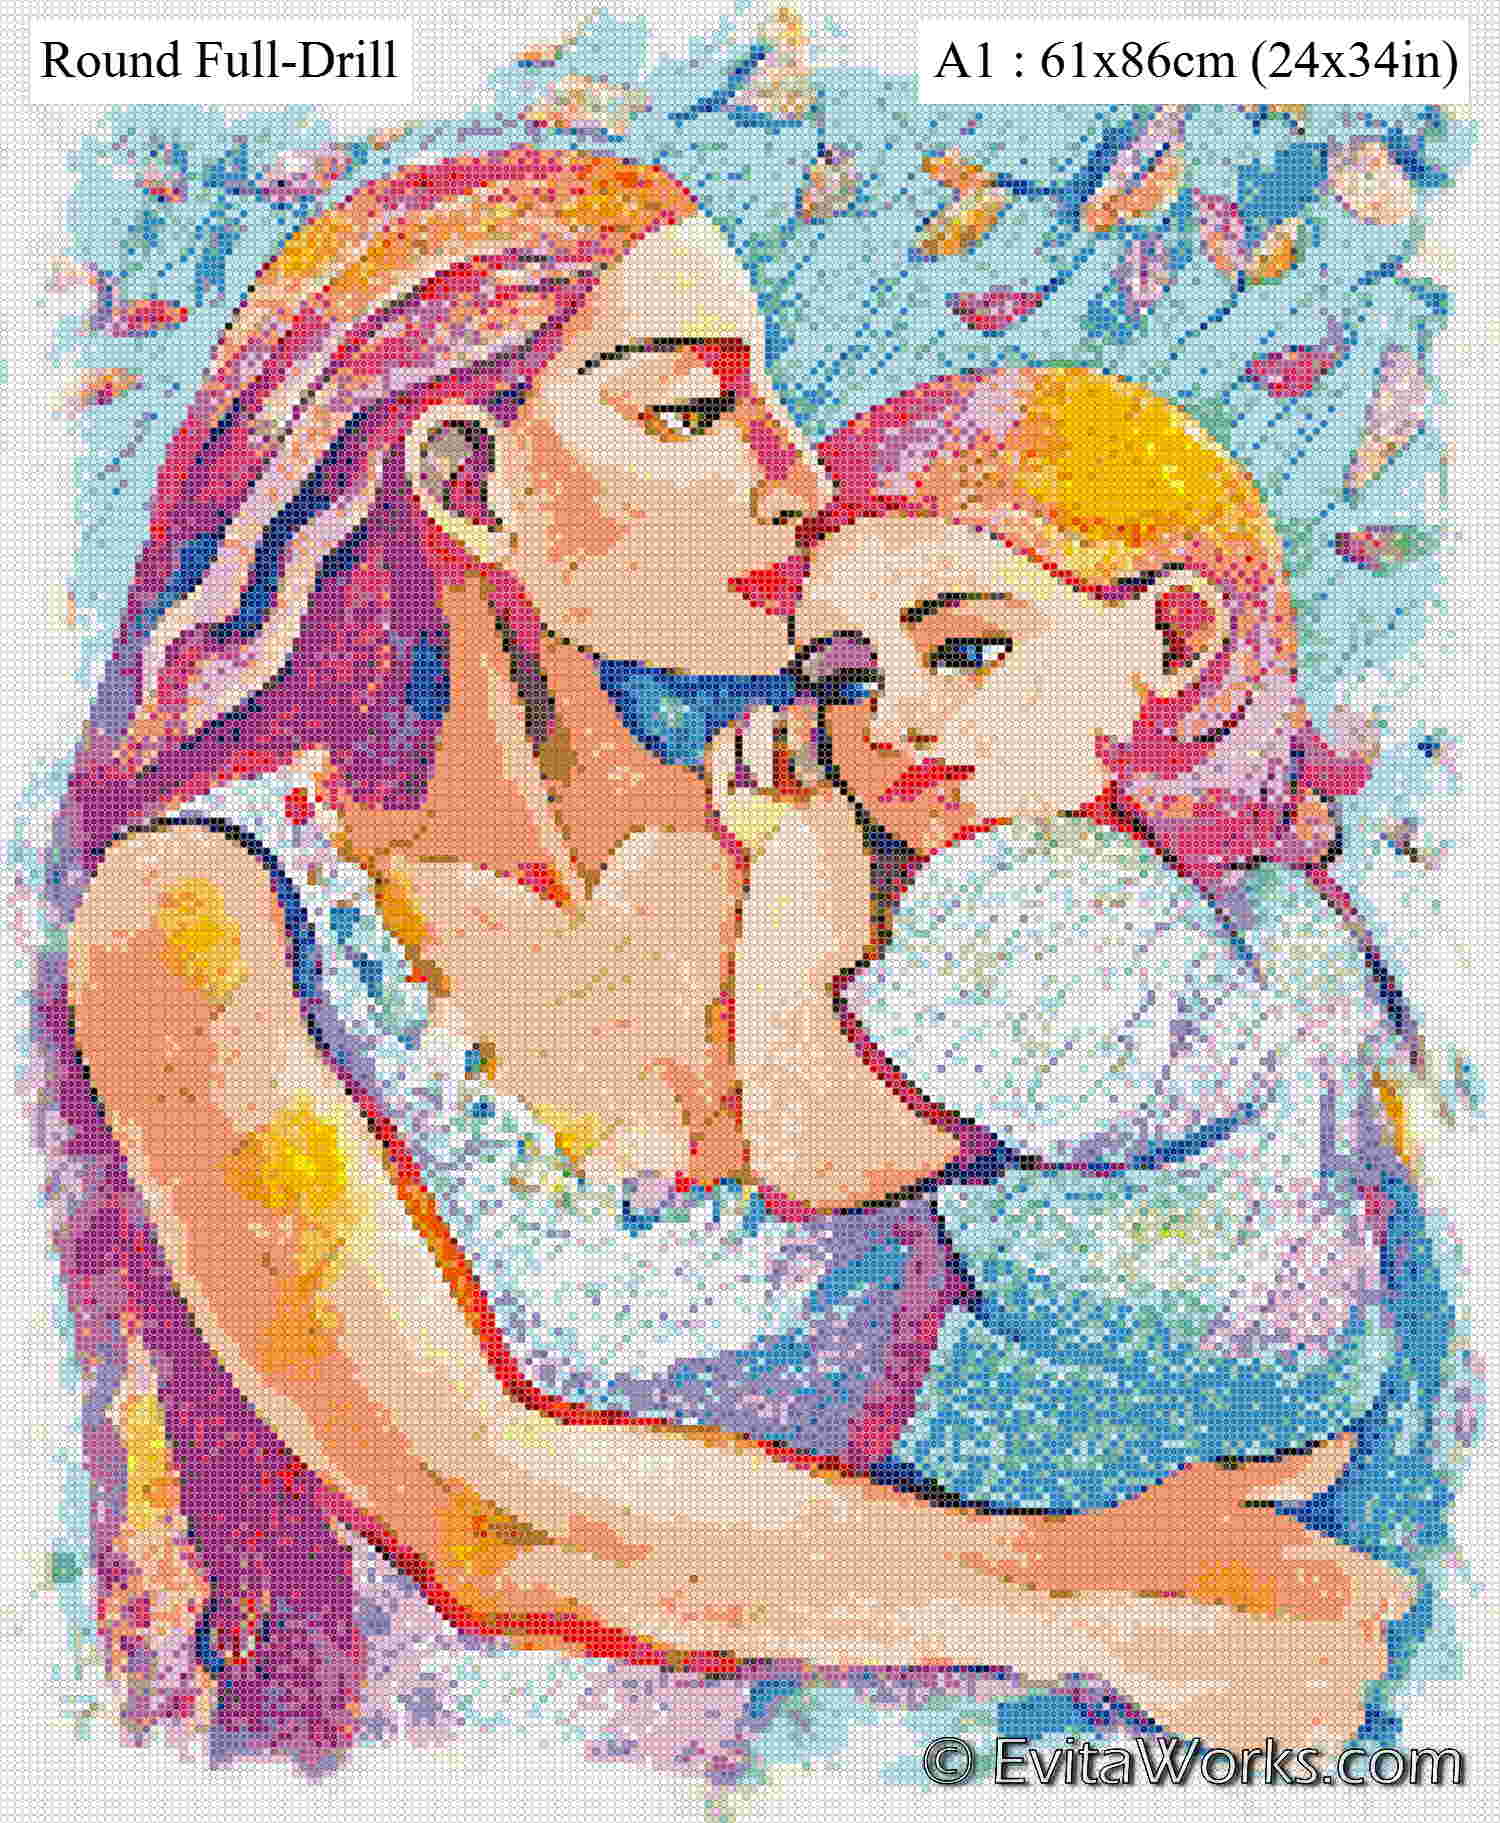 ea mother and child a1rfd ~ EvitaWorks